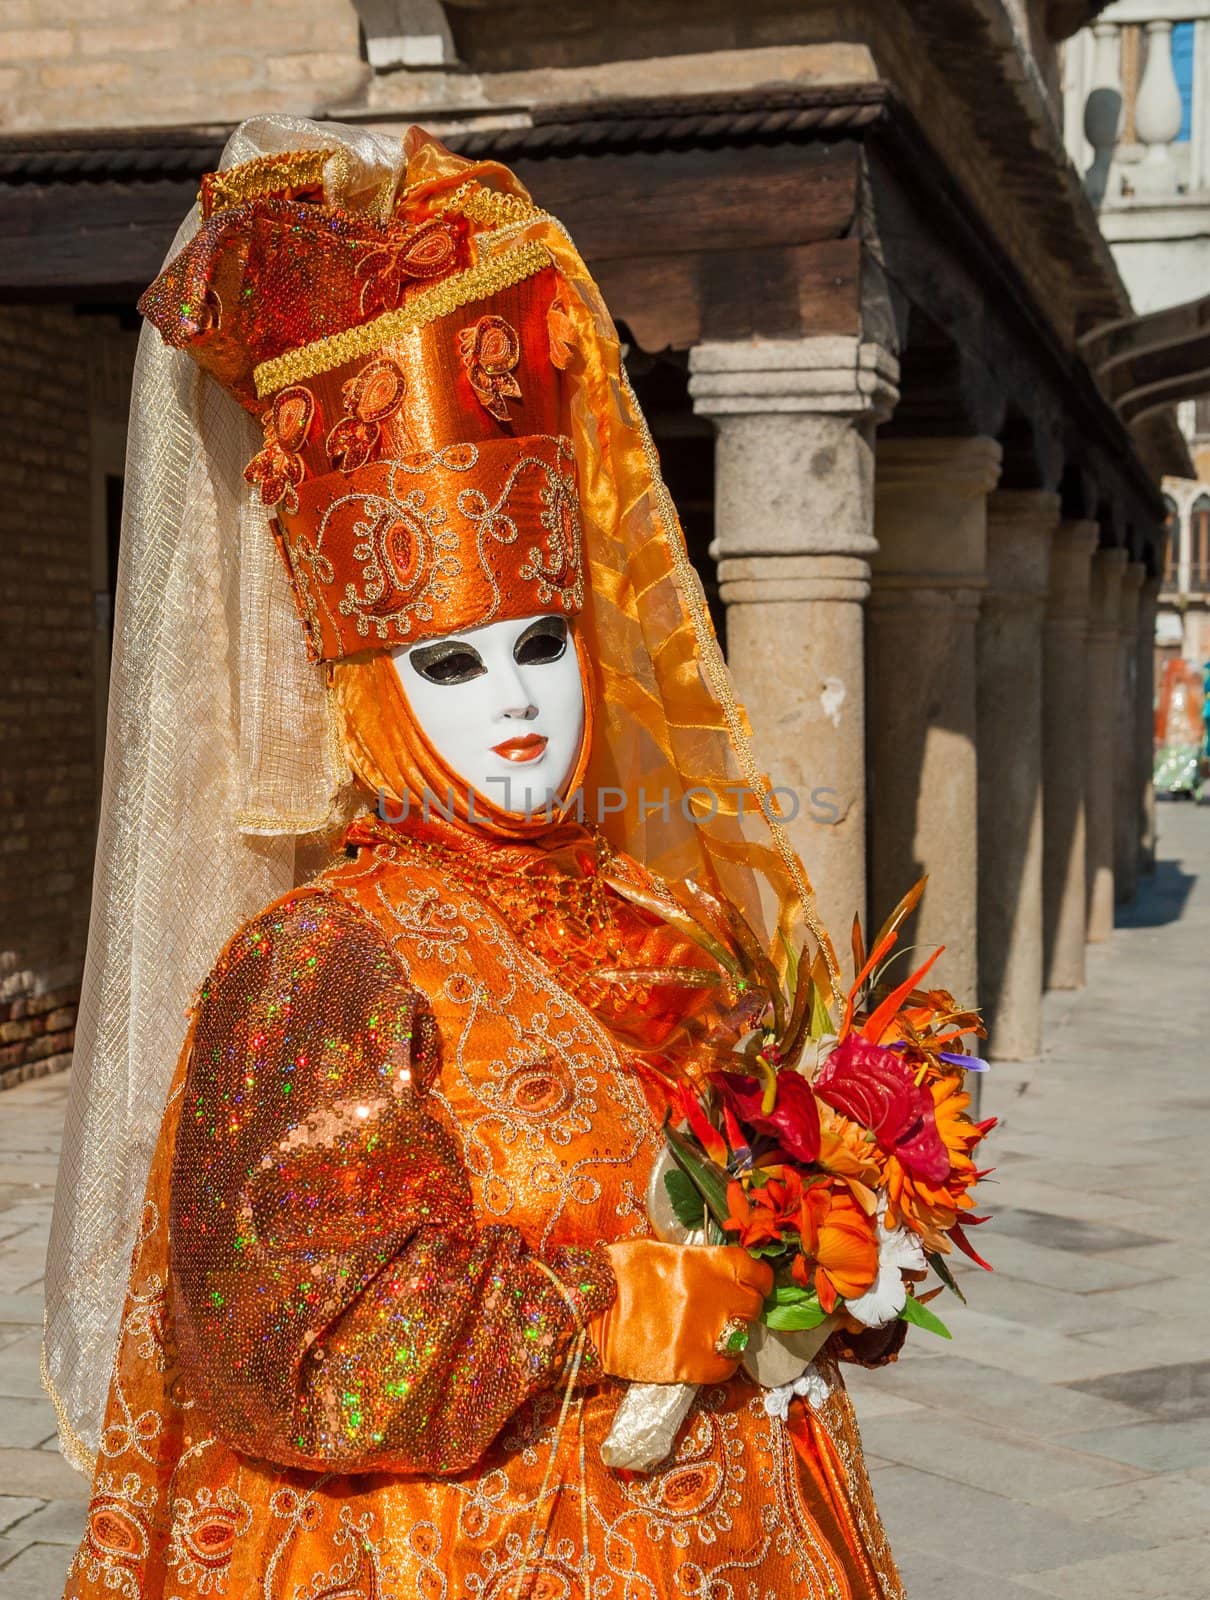 VENICE: An unidentified masked person in costume in St. Mark's Square during the Carnival of Venice, 2010.